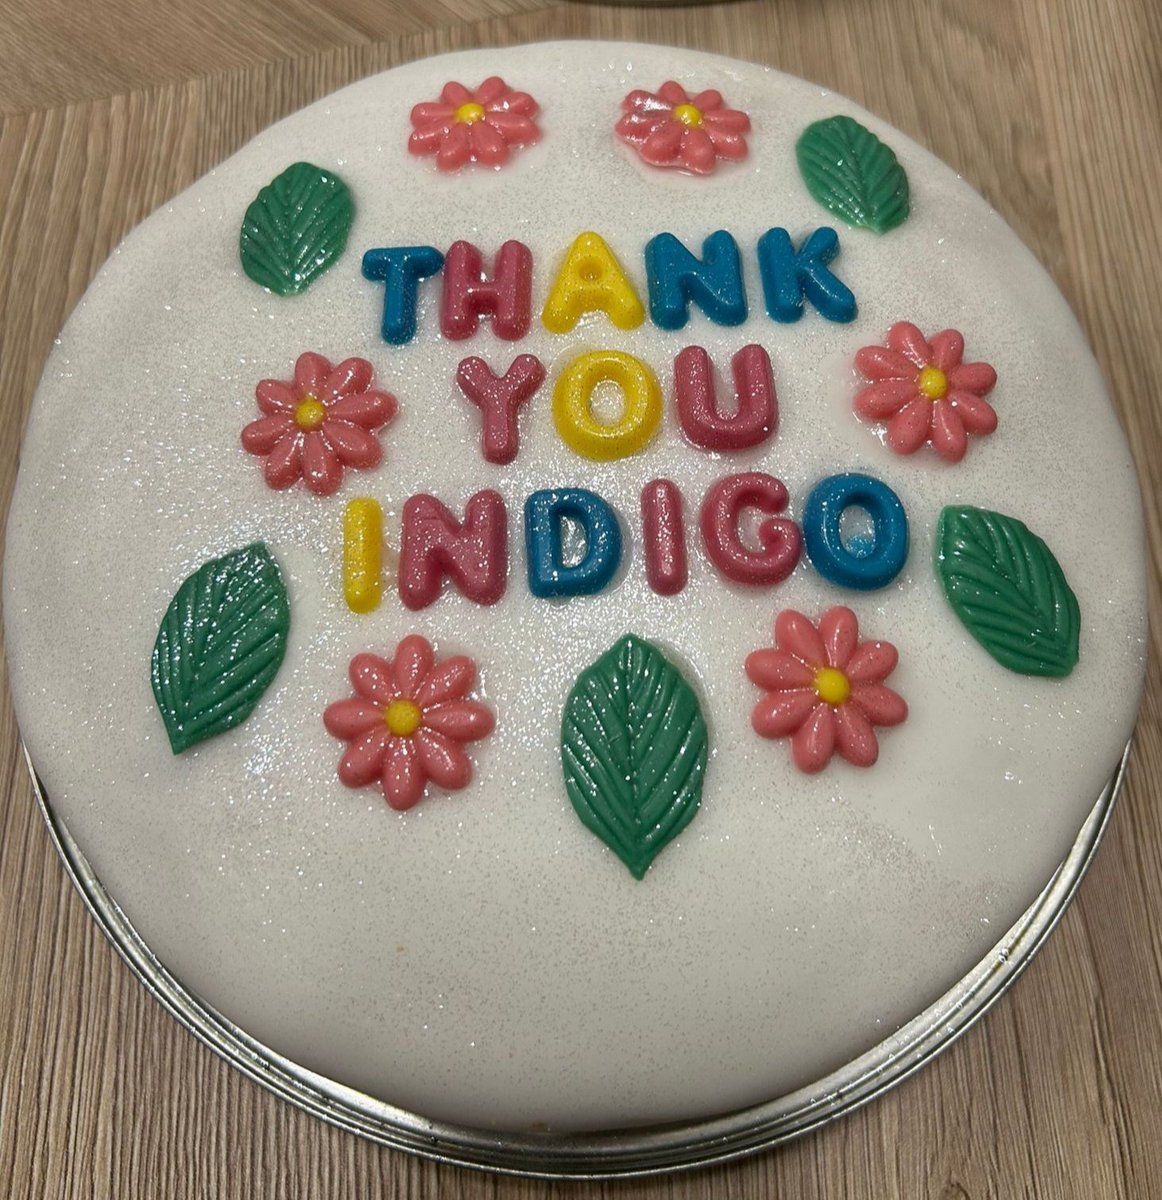 What a lovely thank you gift to the staff for all their support, gorgeous cake made by a young person 🤩 #AncoraHouse #CYPMentalHealth